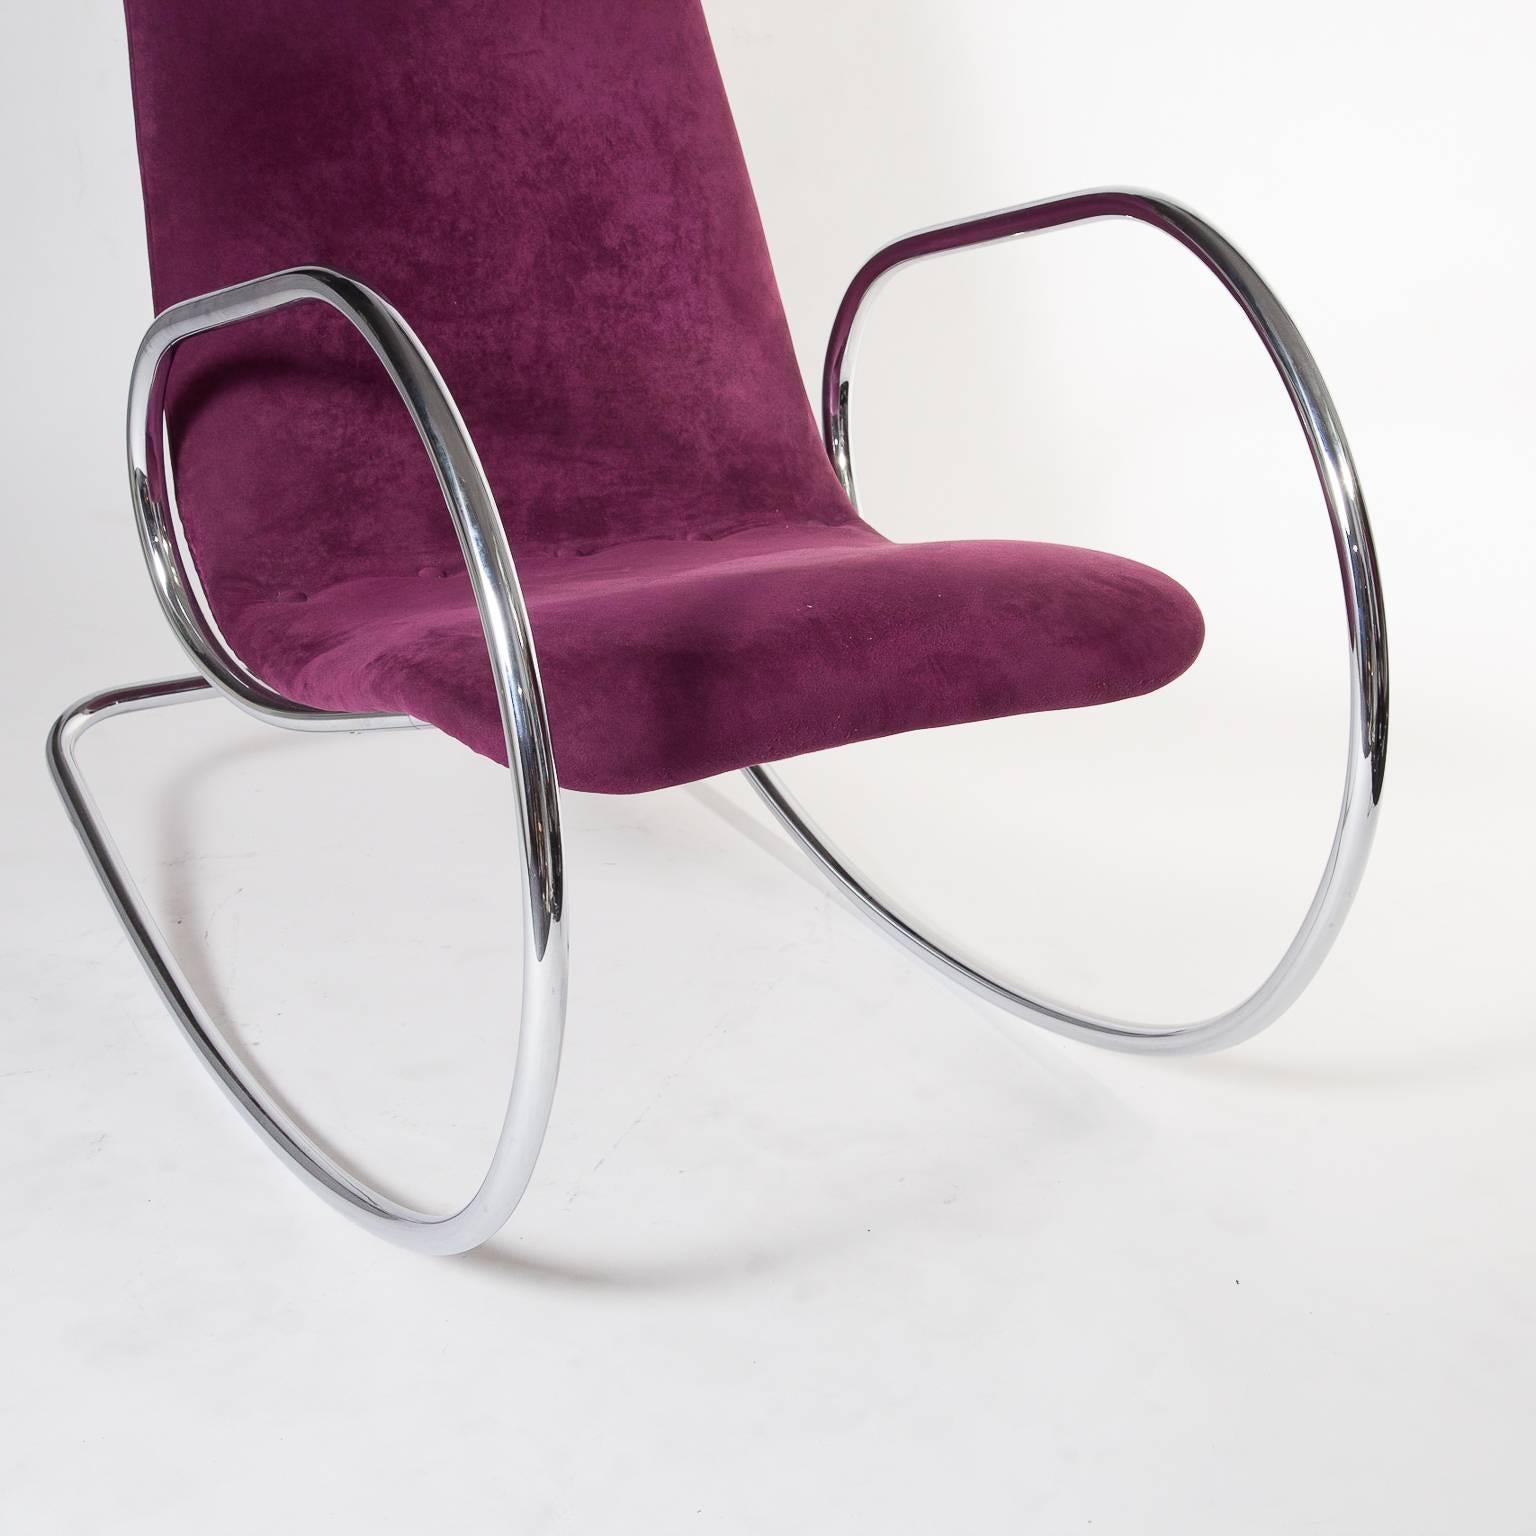 Late 20th Century 20th Century Thonet Chrome Cantilever Rocking Chair S826, Germany, circa 1970